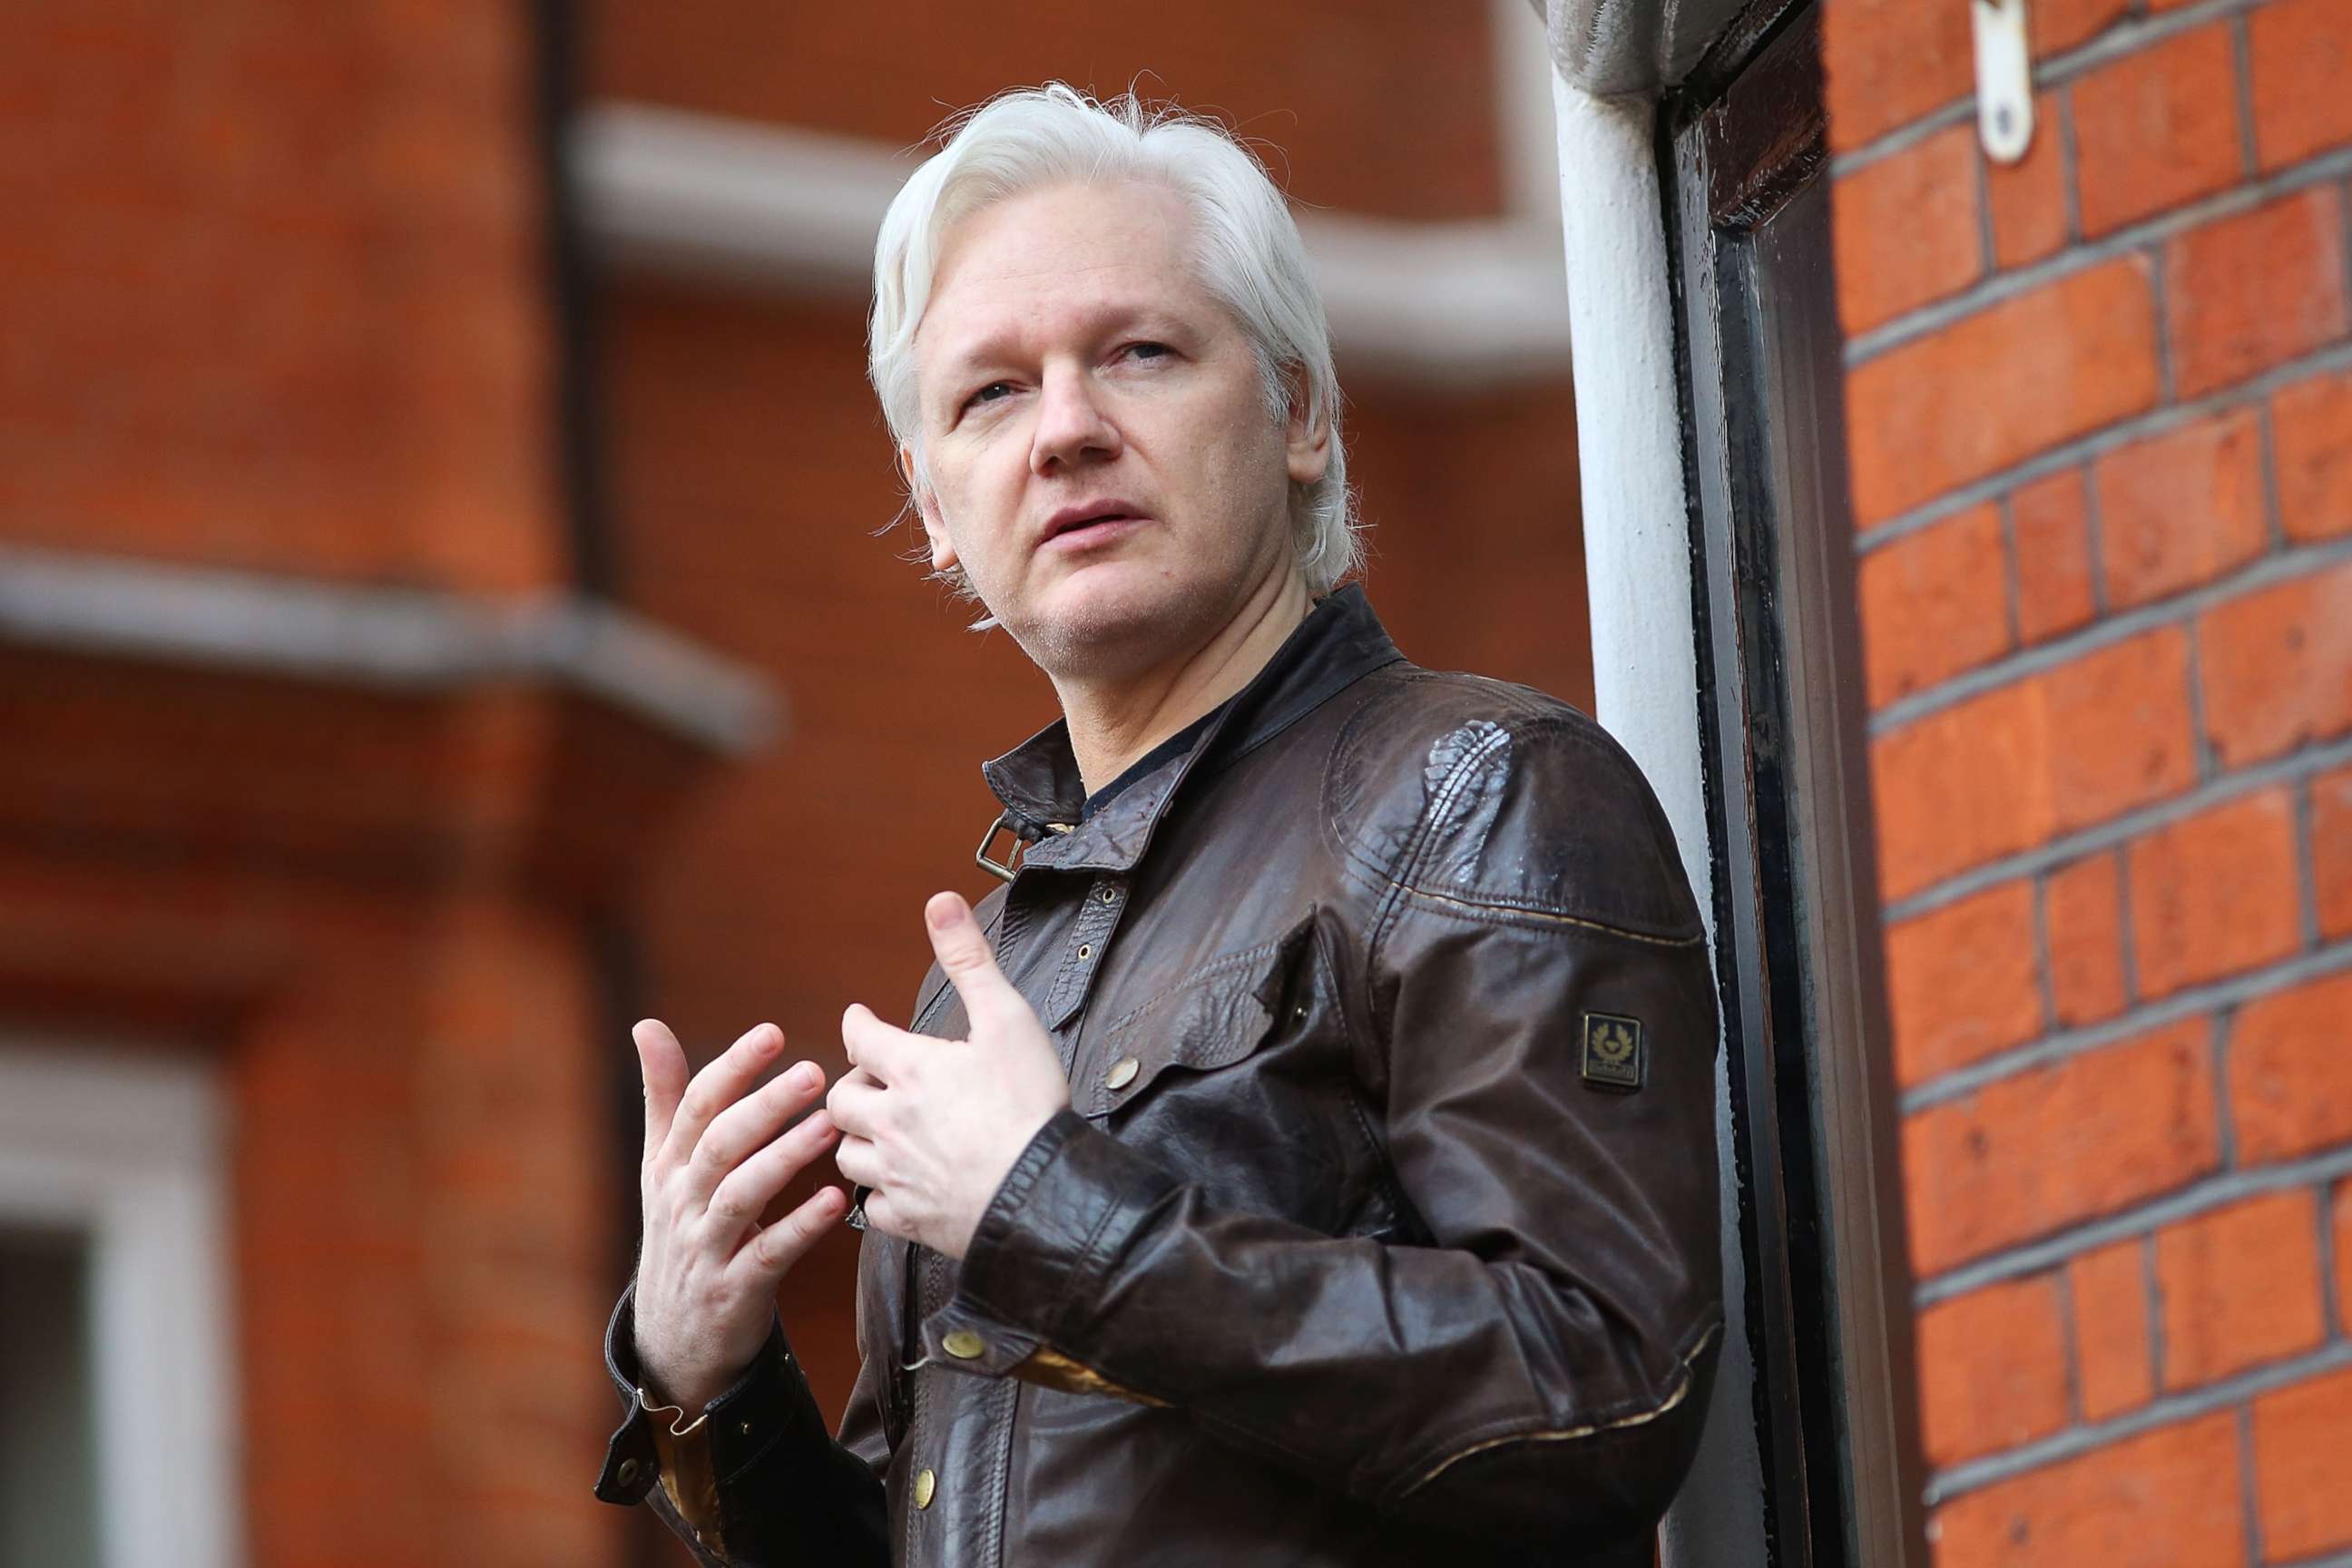 PHOTO: Julian Assange speaks to the media from the balcony of the Embassy of Ecuador, May 19, 2017, in London.